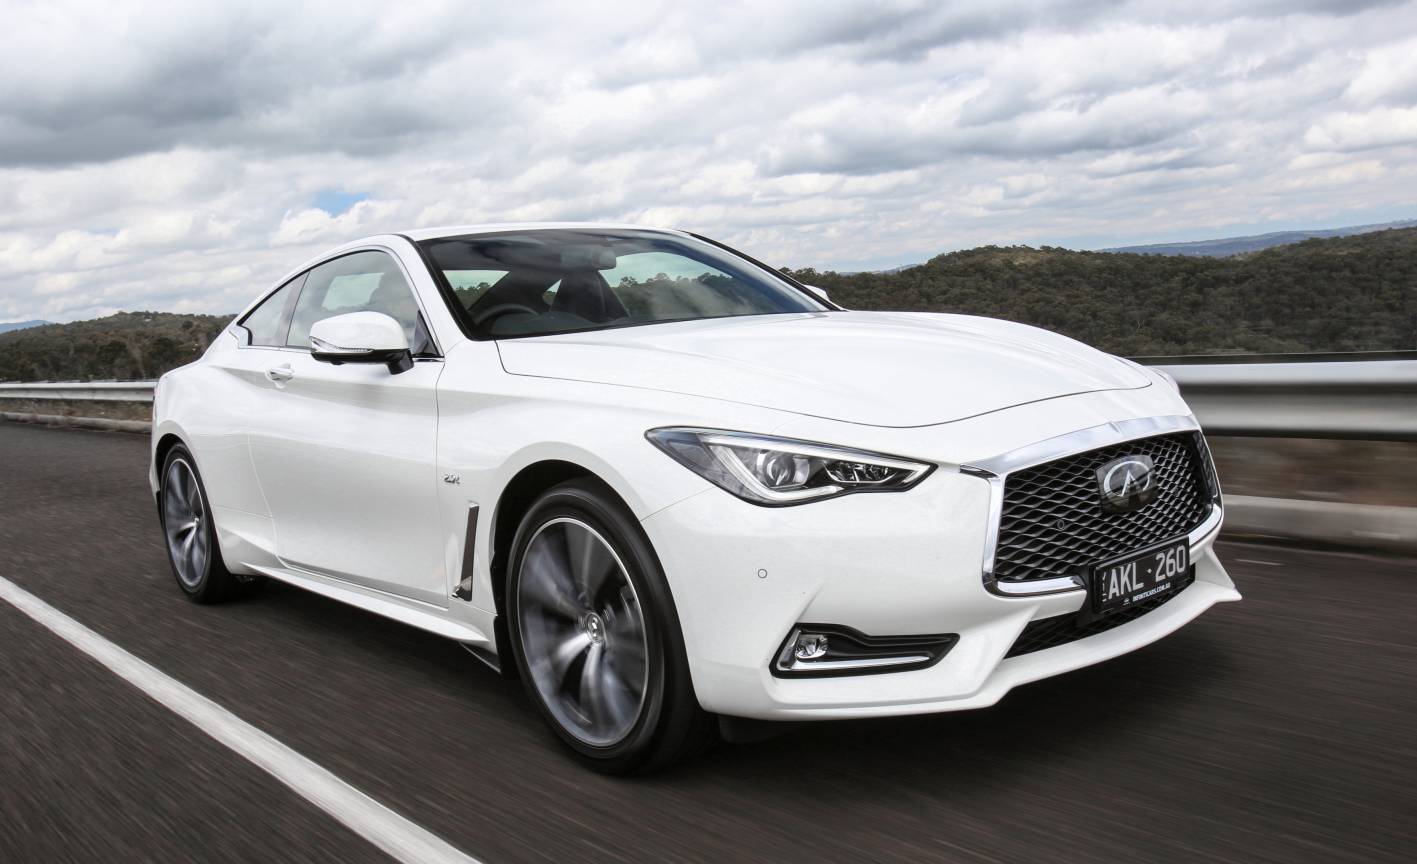 Infiniti Q60 now on sale in Australia from $62,900